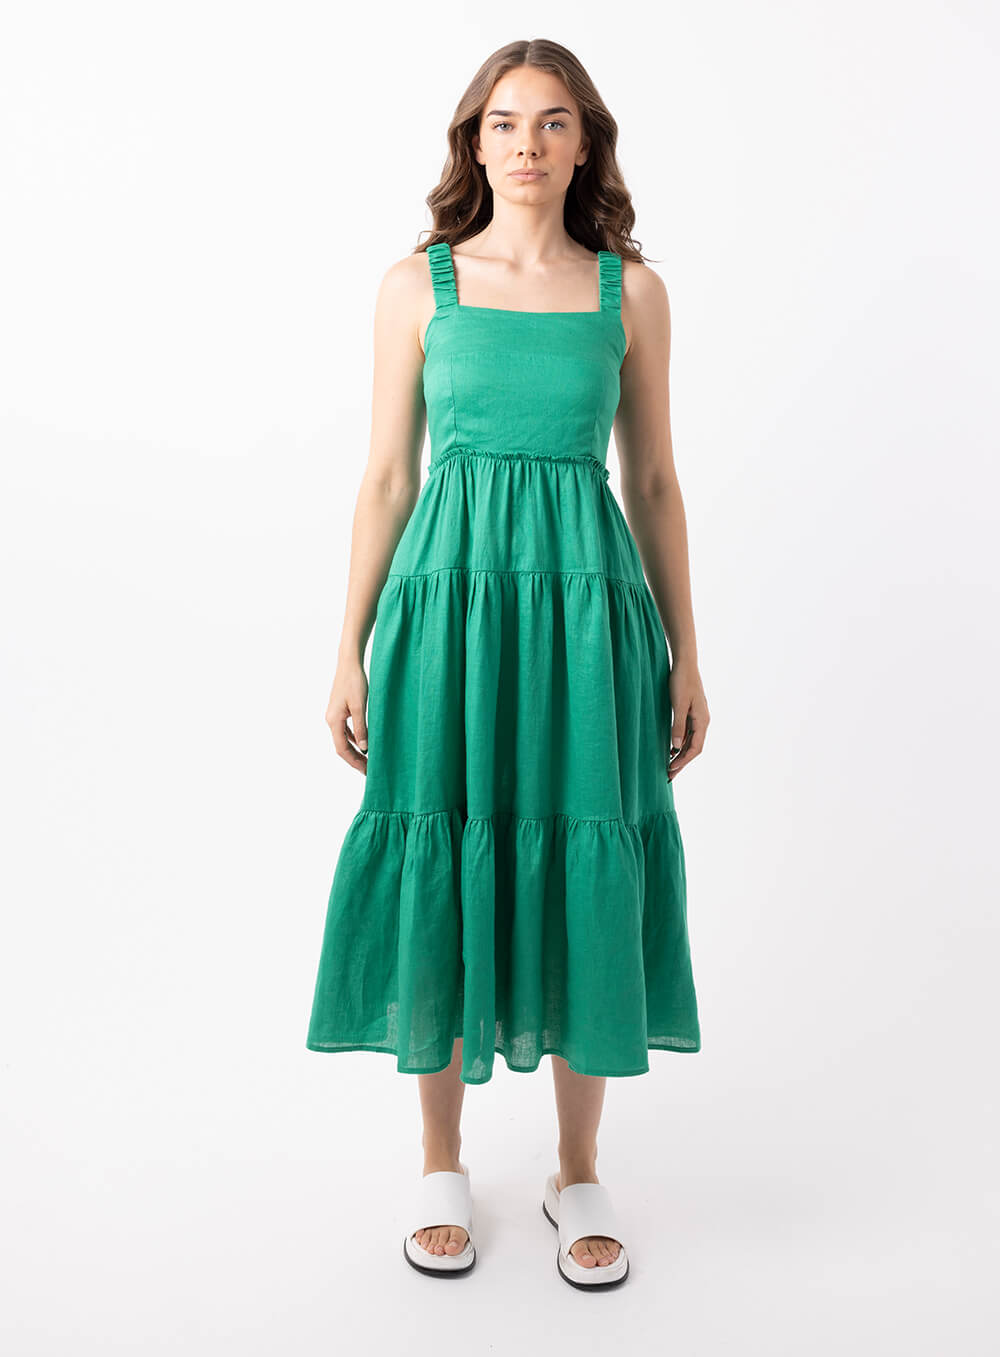 The Finlay Linen dress in green is made from 100% breathable linen, featuring a tiered skirt, thin rouched straps and 2 side pockets